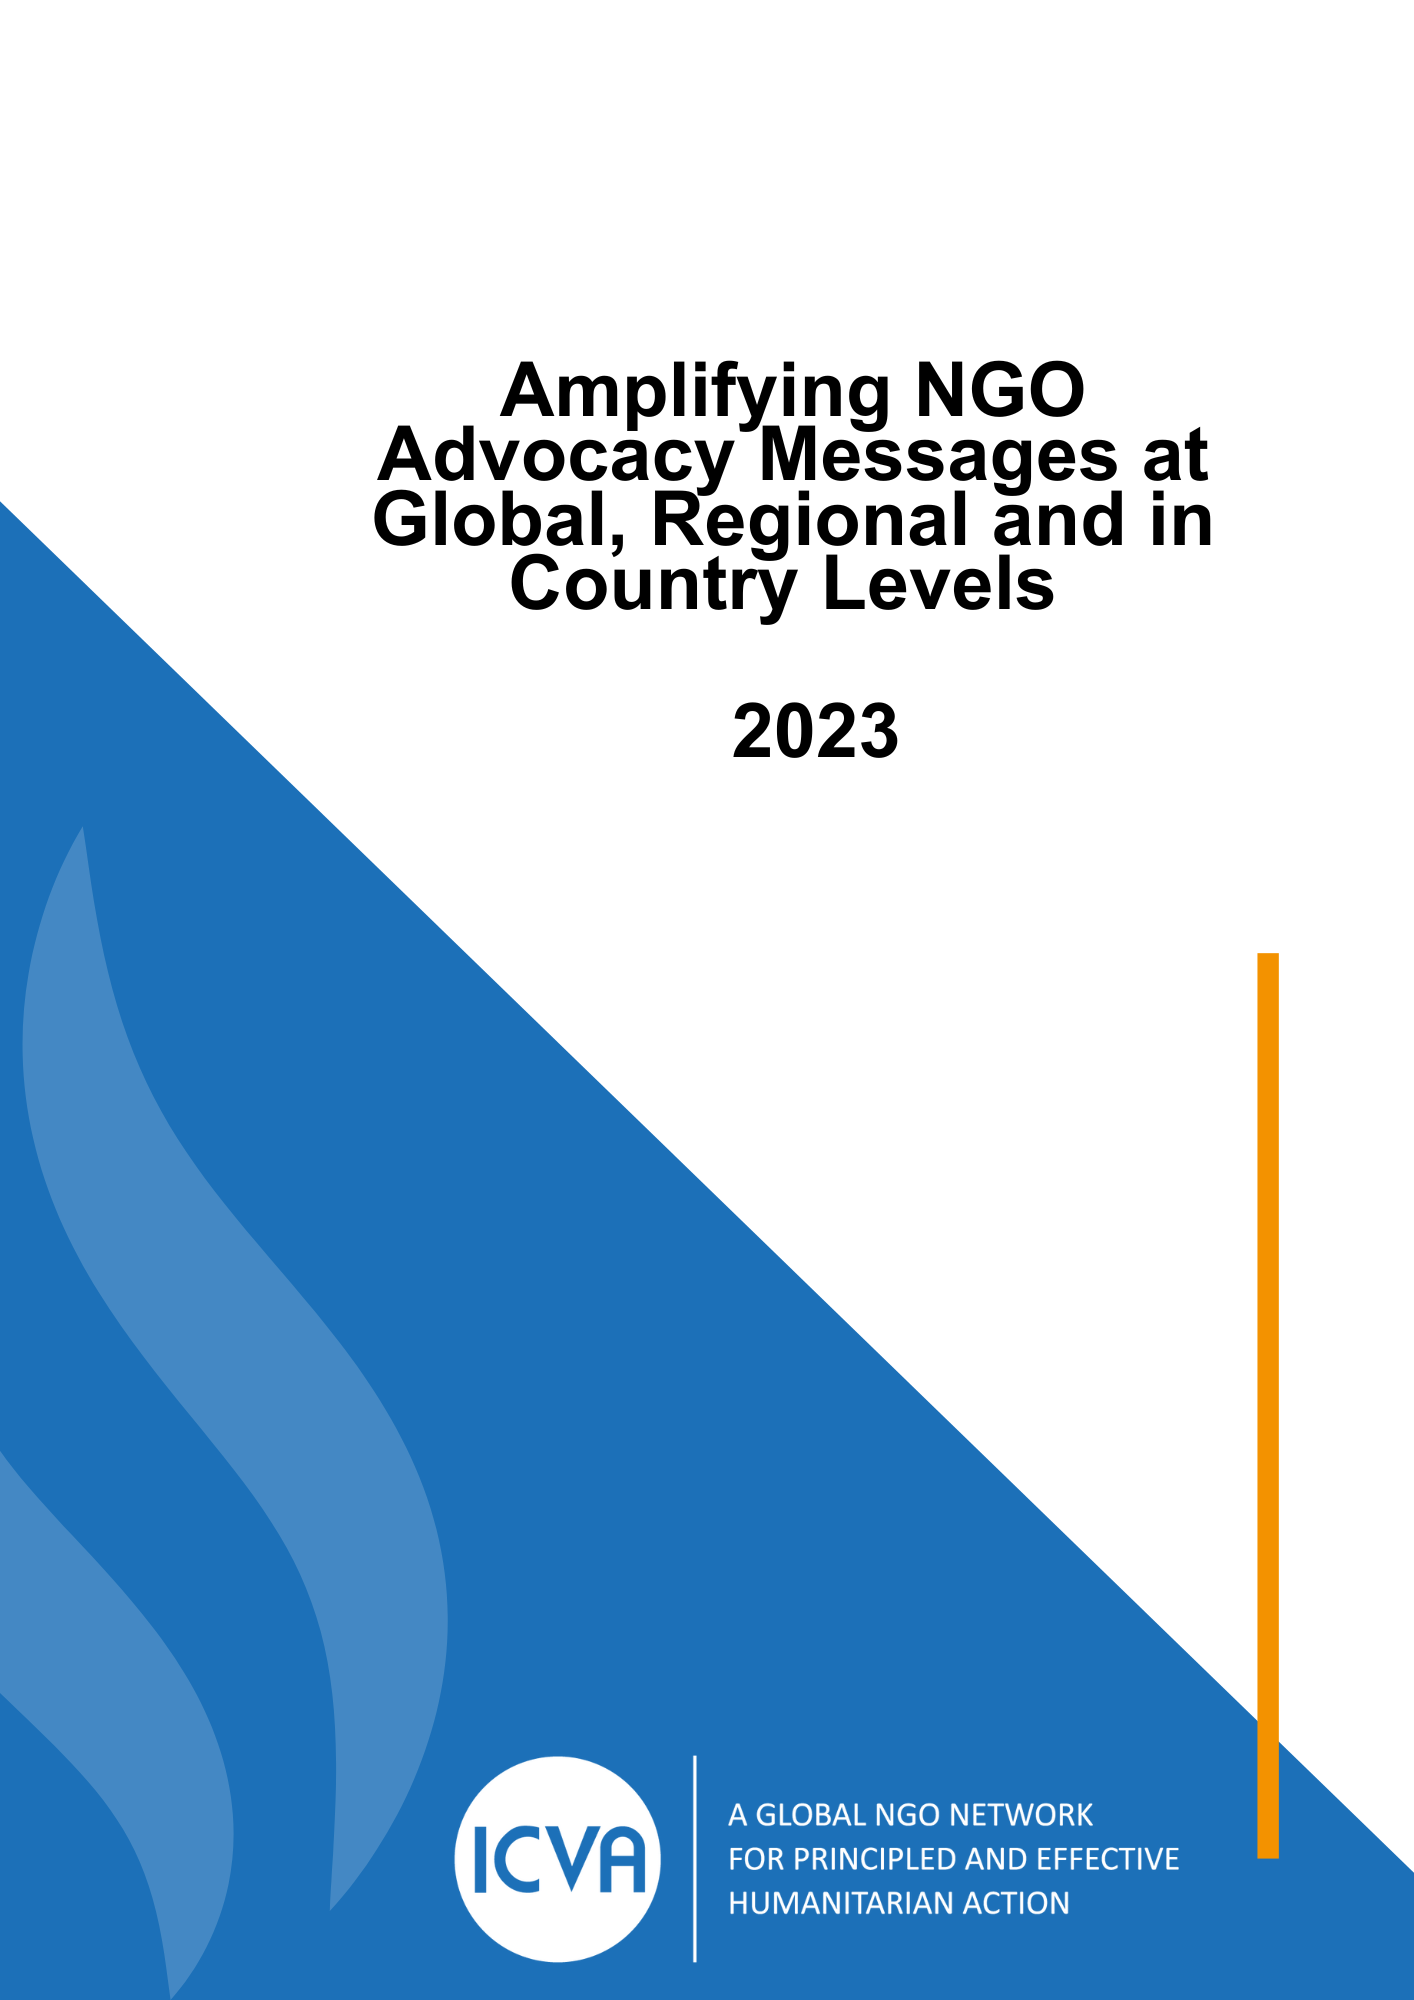 Amplifying NGO Advocacy Messages at Global, Regional and in Country Levels